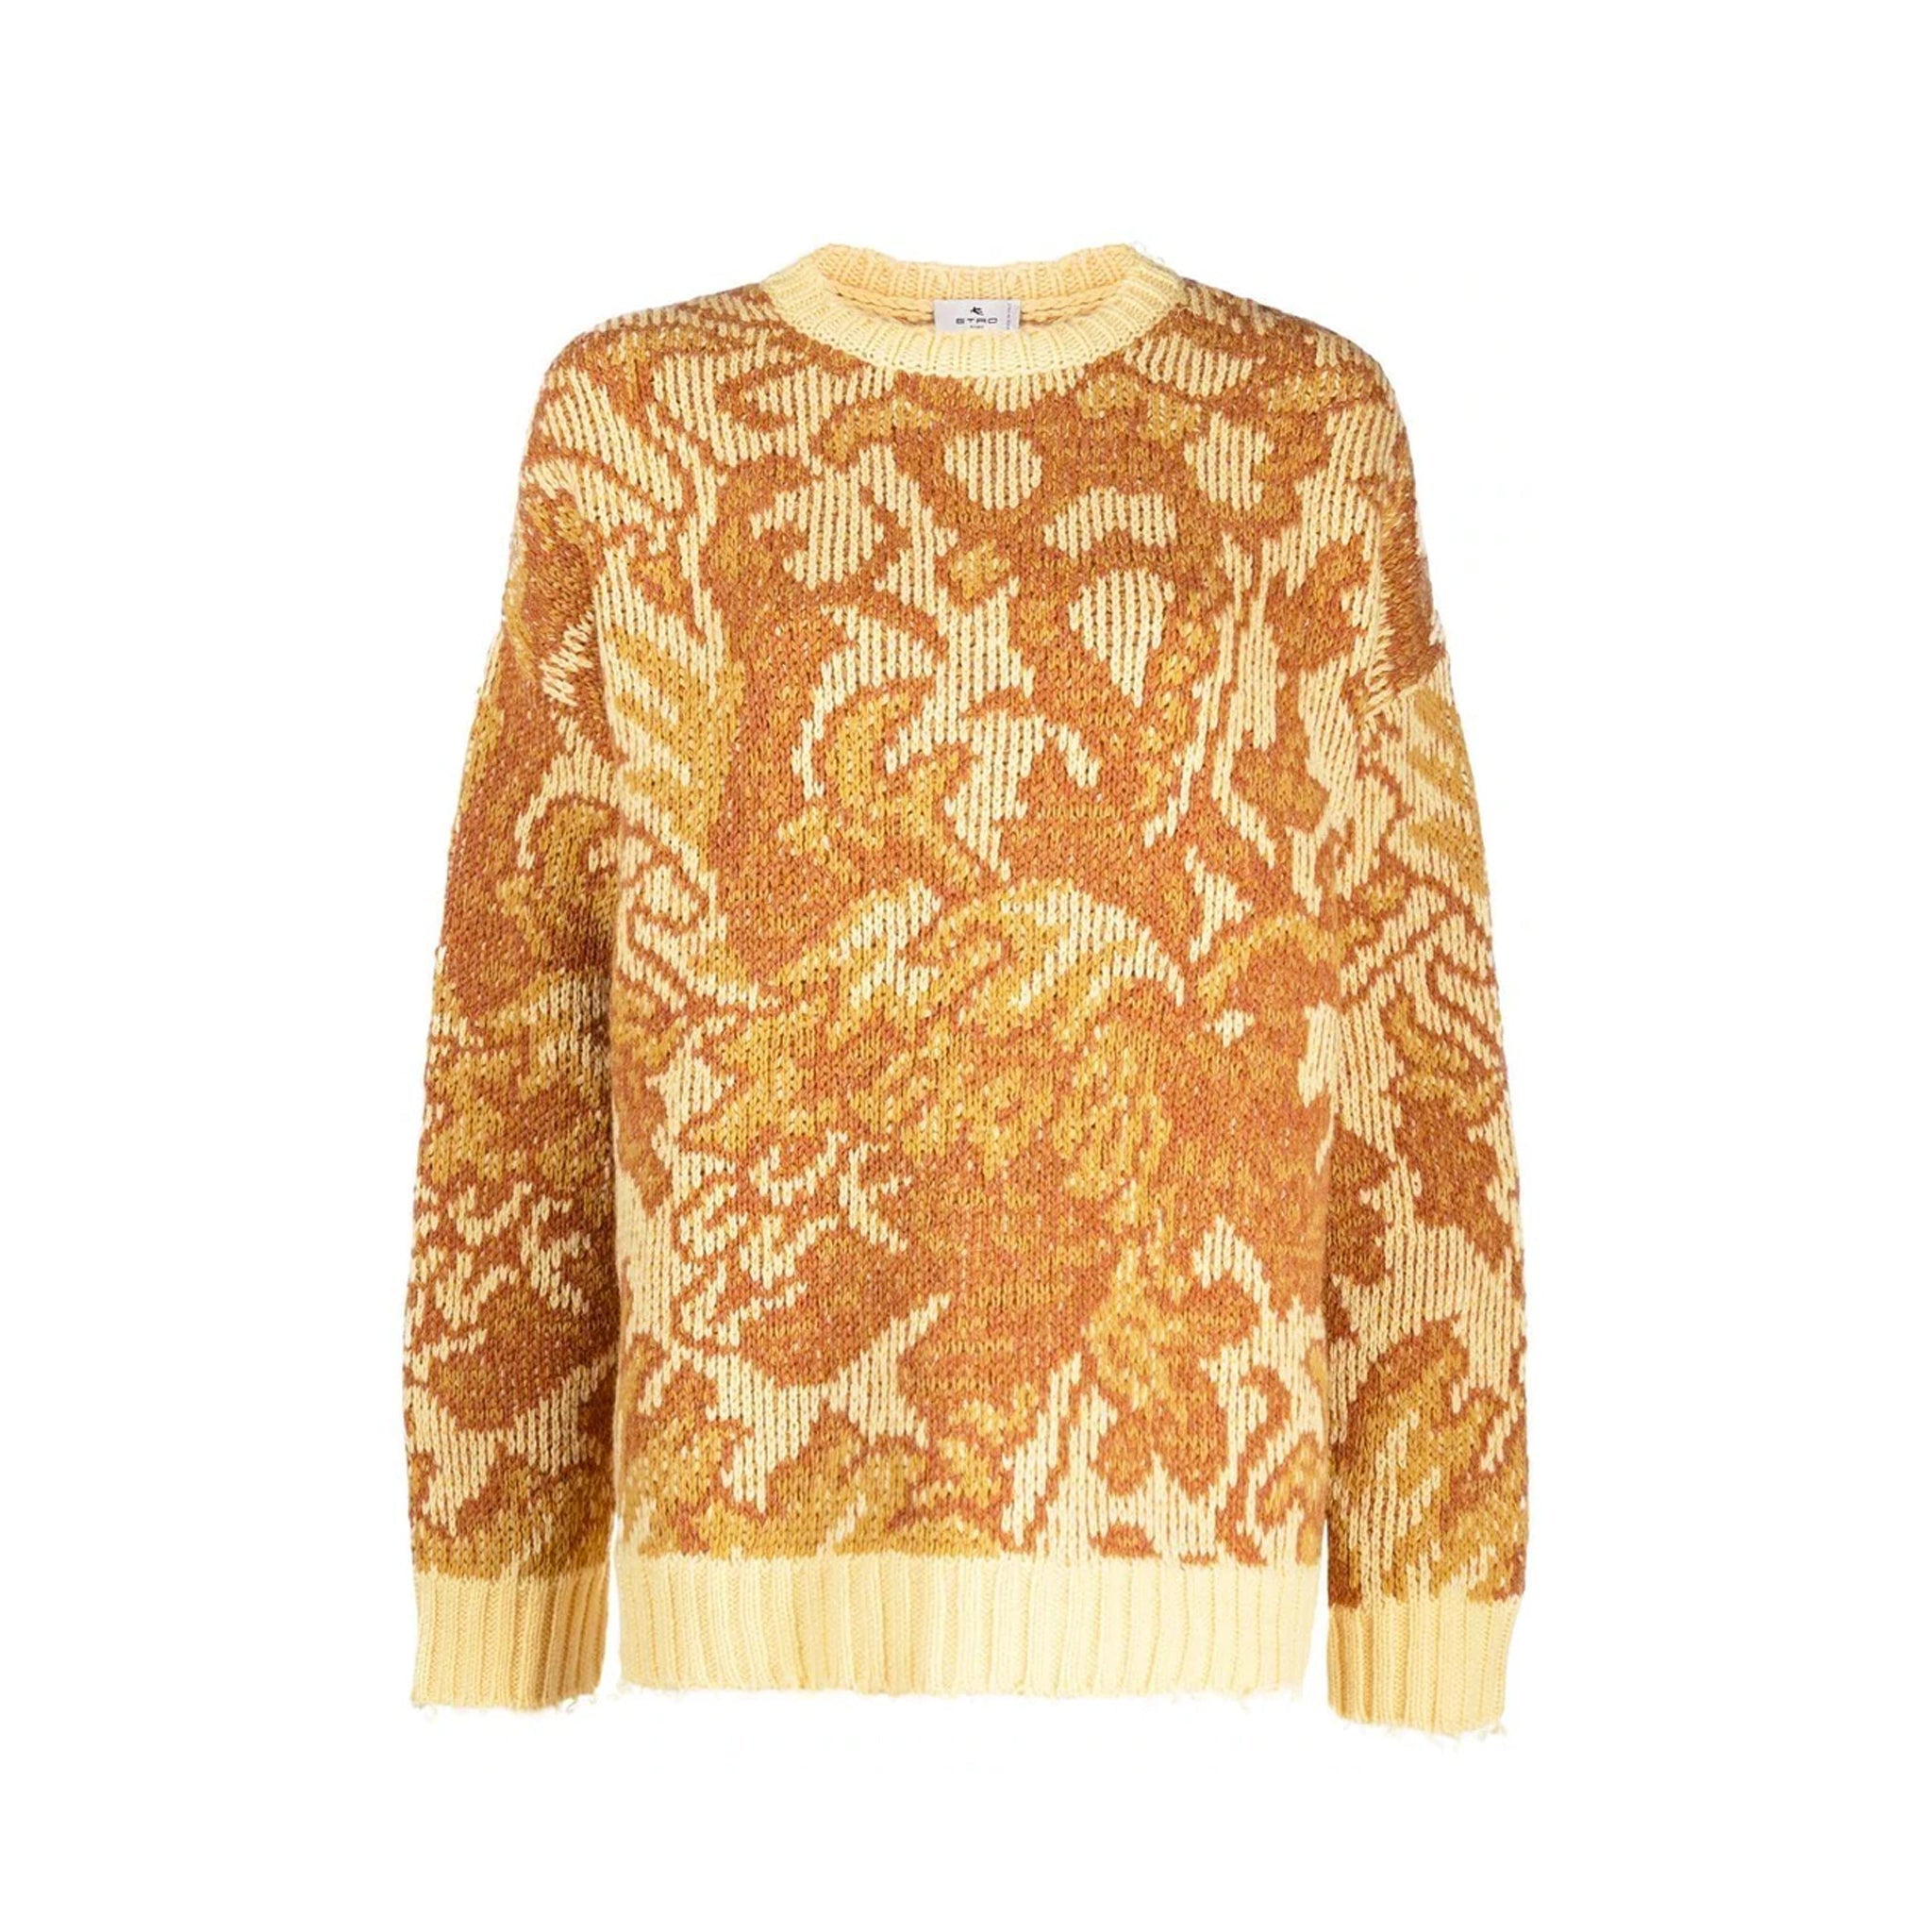 ETRO-OUTLET-SALE-Etro-Jacquard-Wool-Sweater-Strick-YELLOW-M-ARCHIVE-COLLECTION.jpg